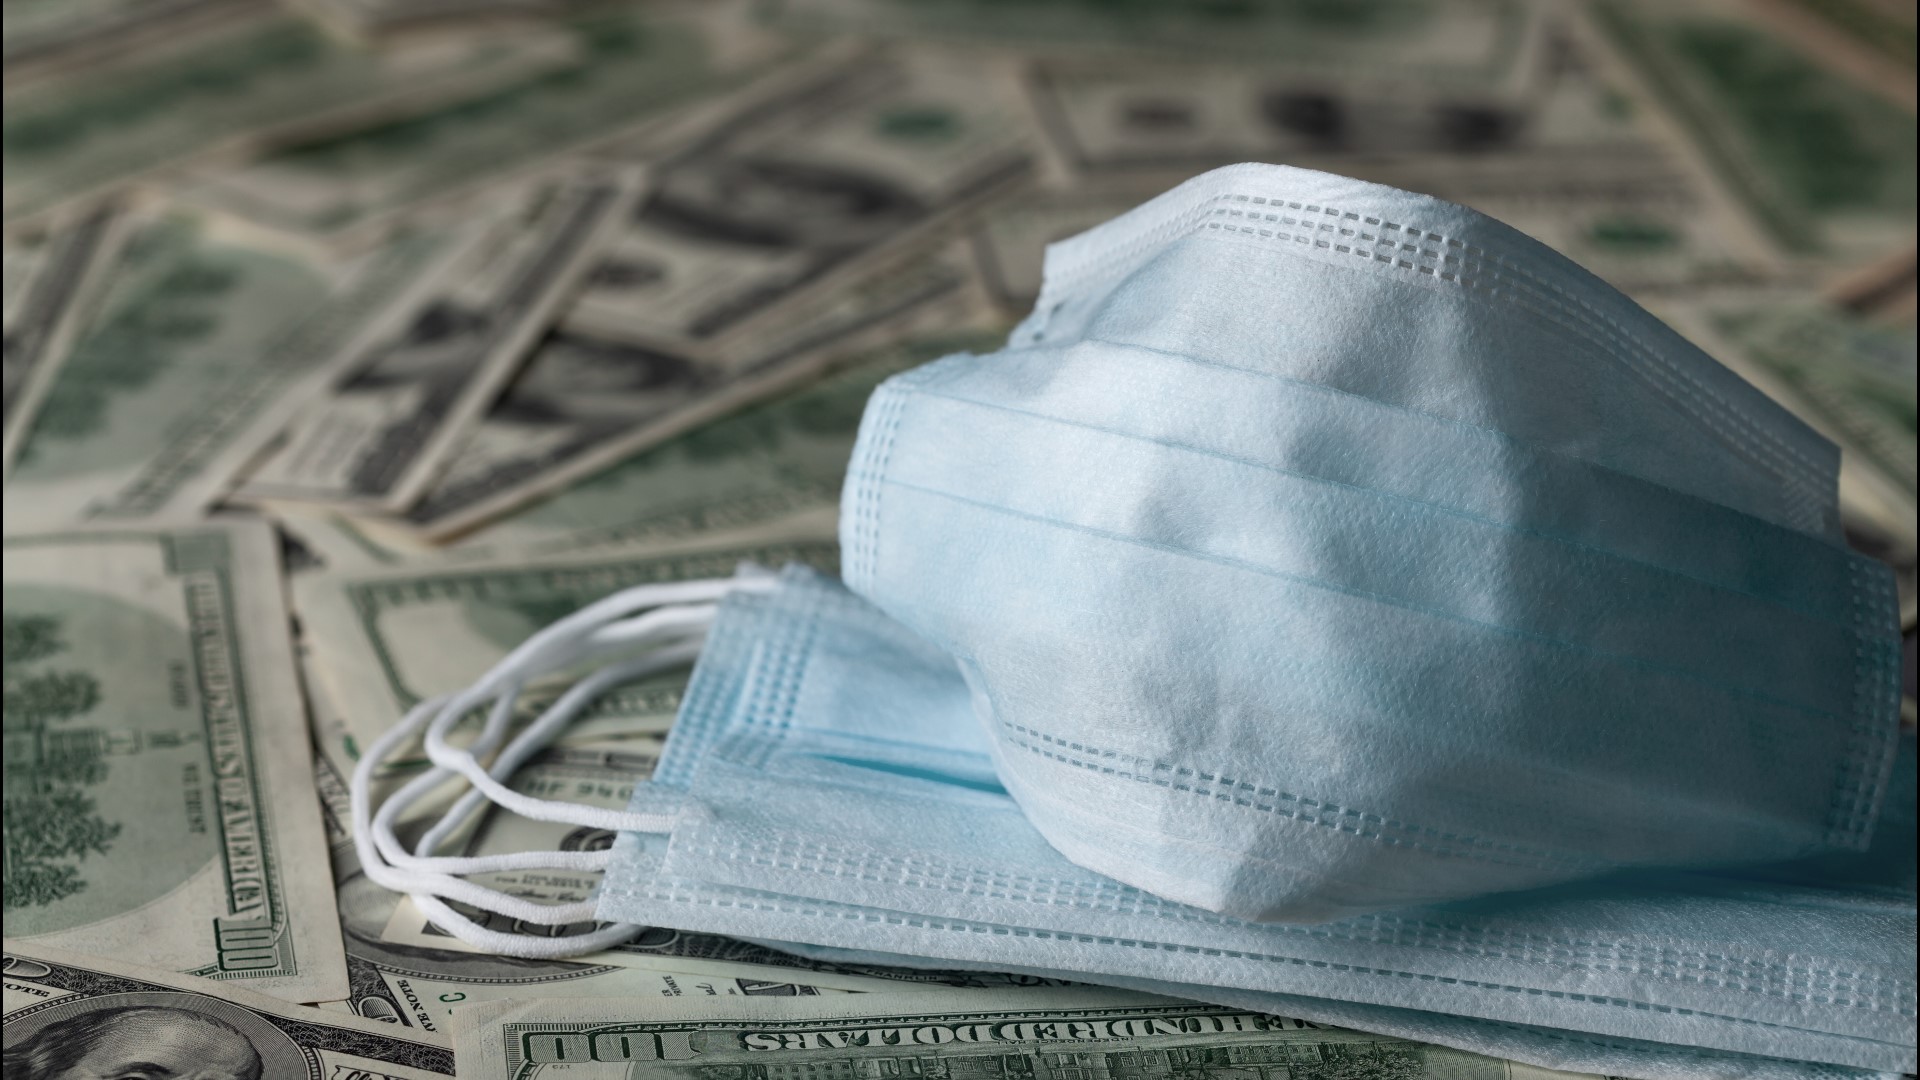 Federal funding in the fight against COVID-19 is running low according to lawmakers. Some doctors worry the burden costs may fall on the uninsured.